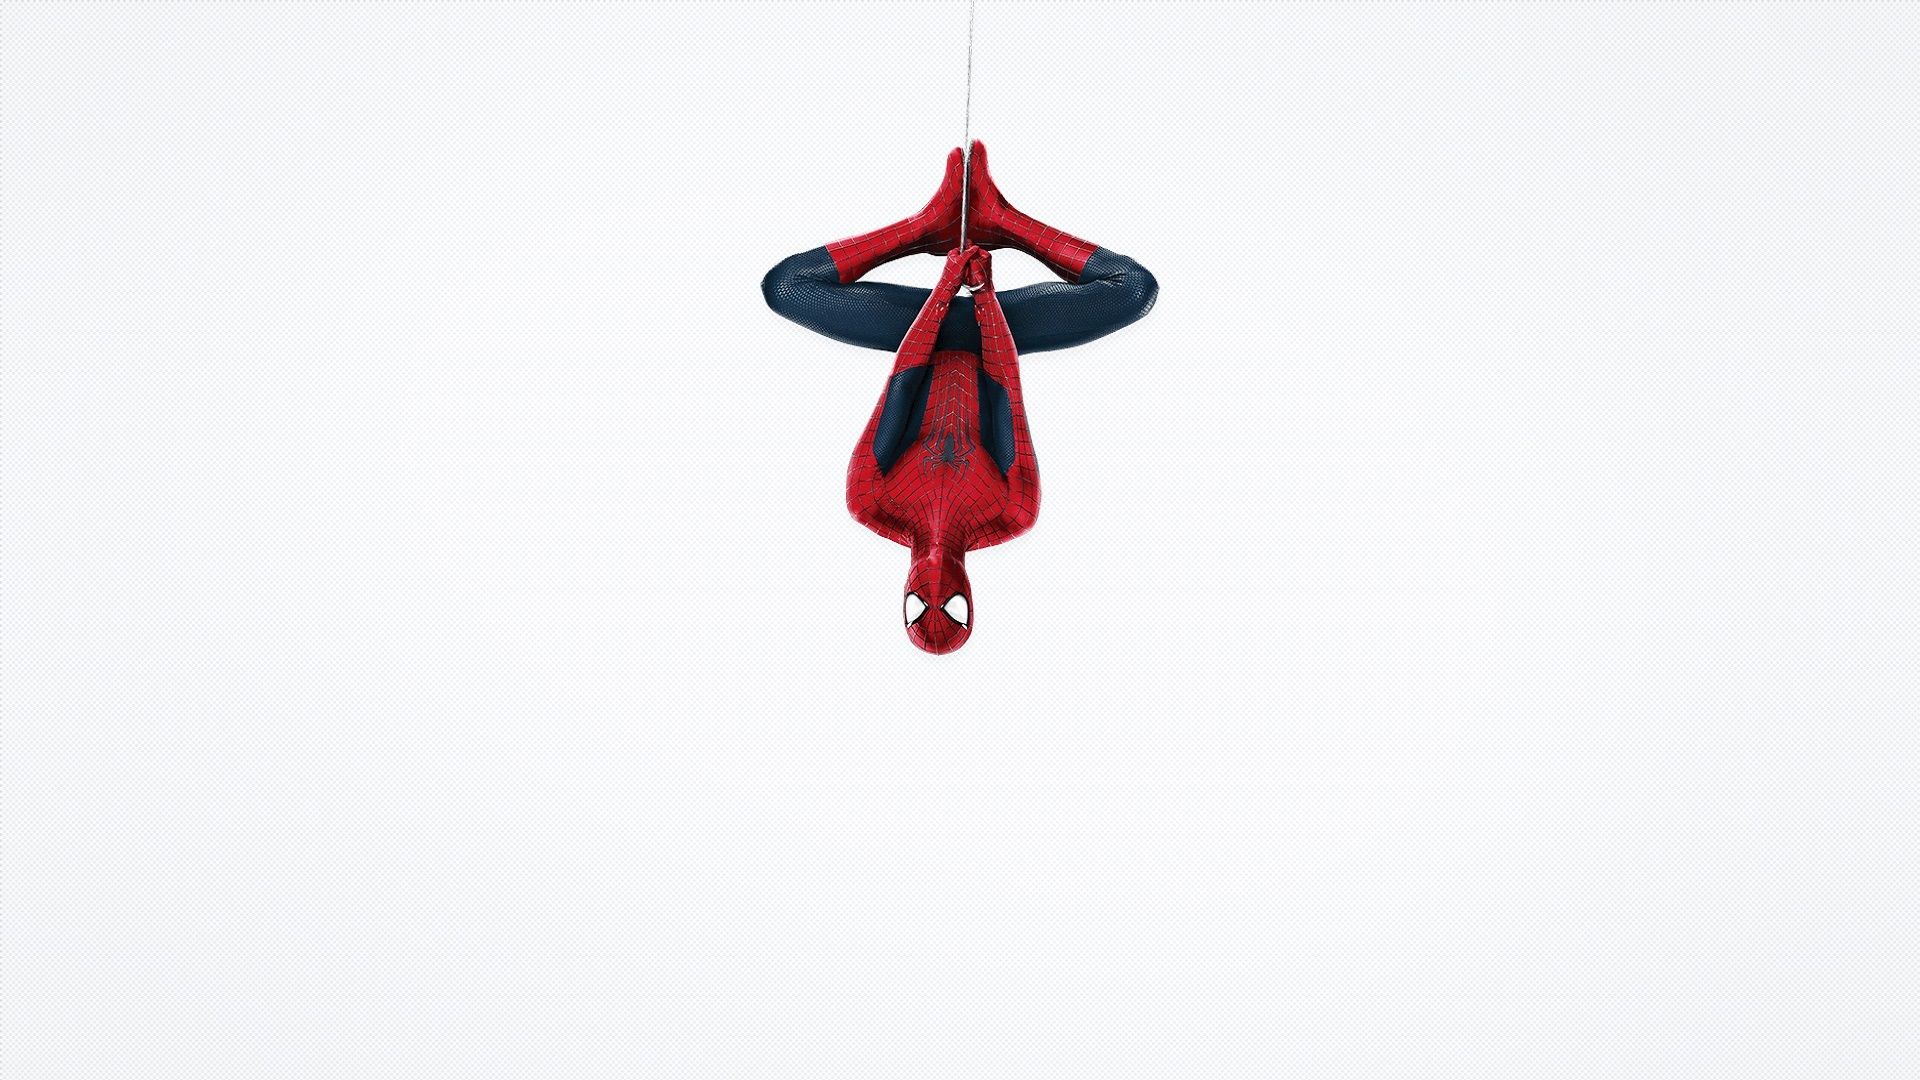 Spider-Man hanging upside down from a web - 